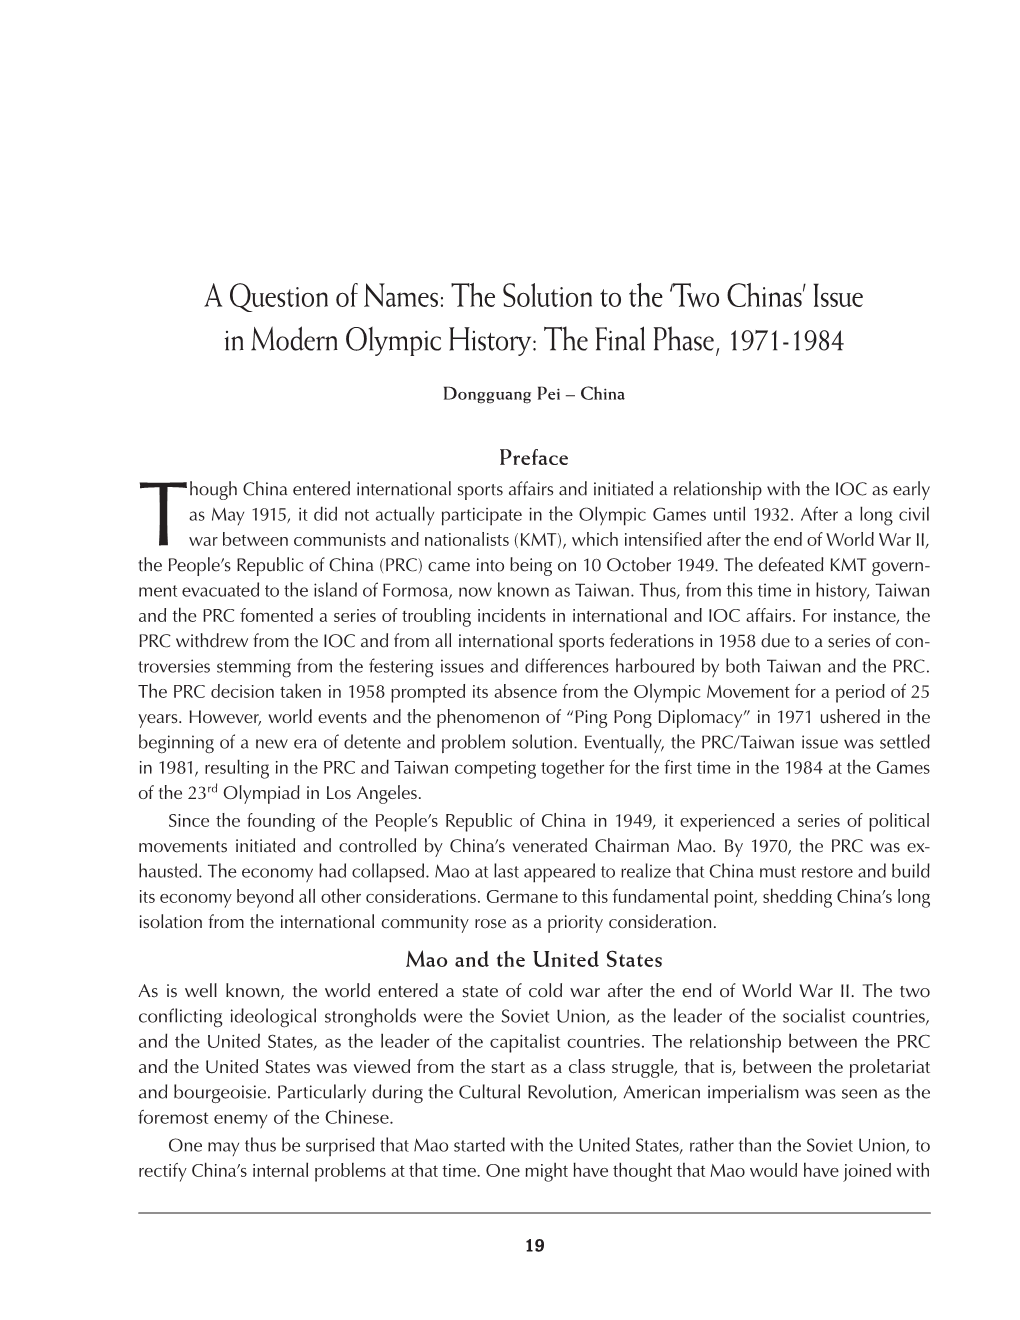 Issue in Modern Olympic History: the Final Phase, 1971-1984